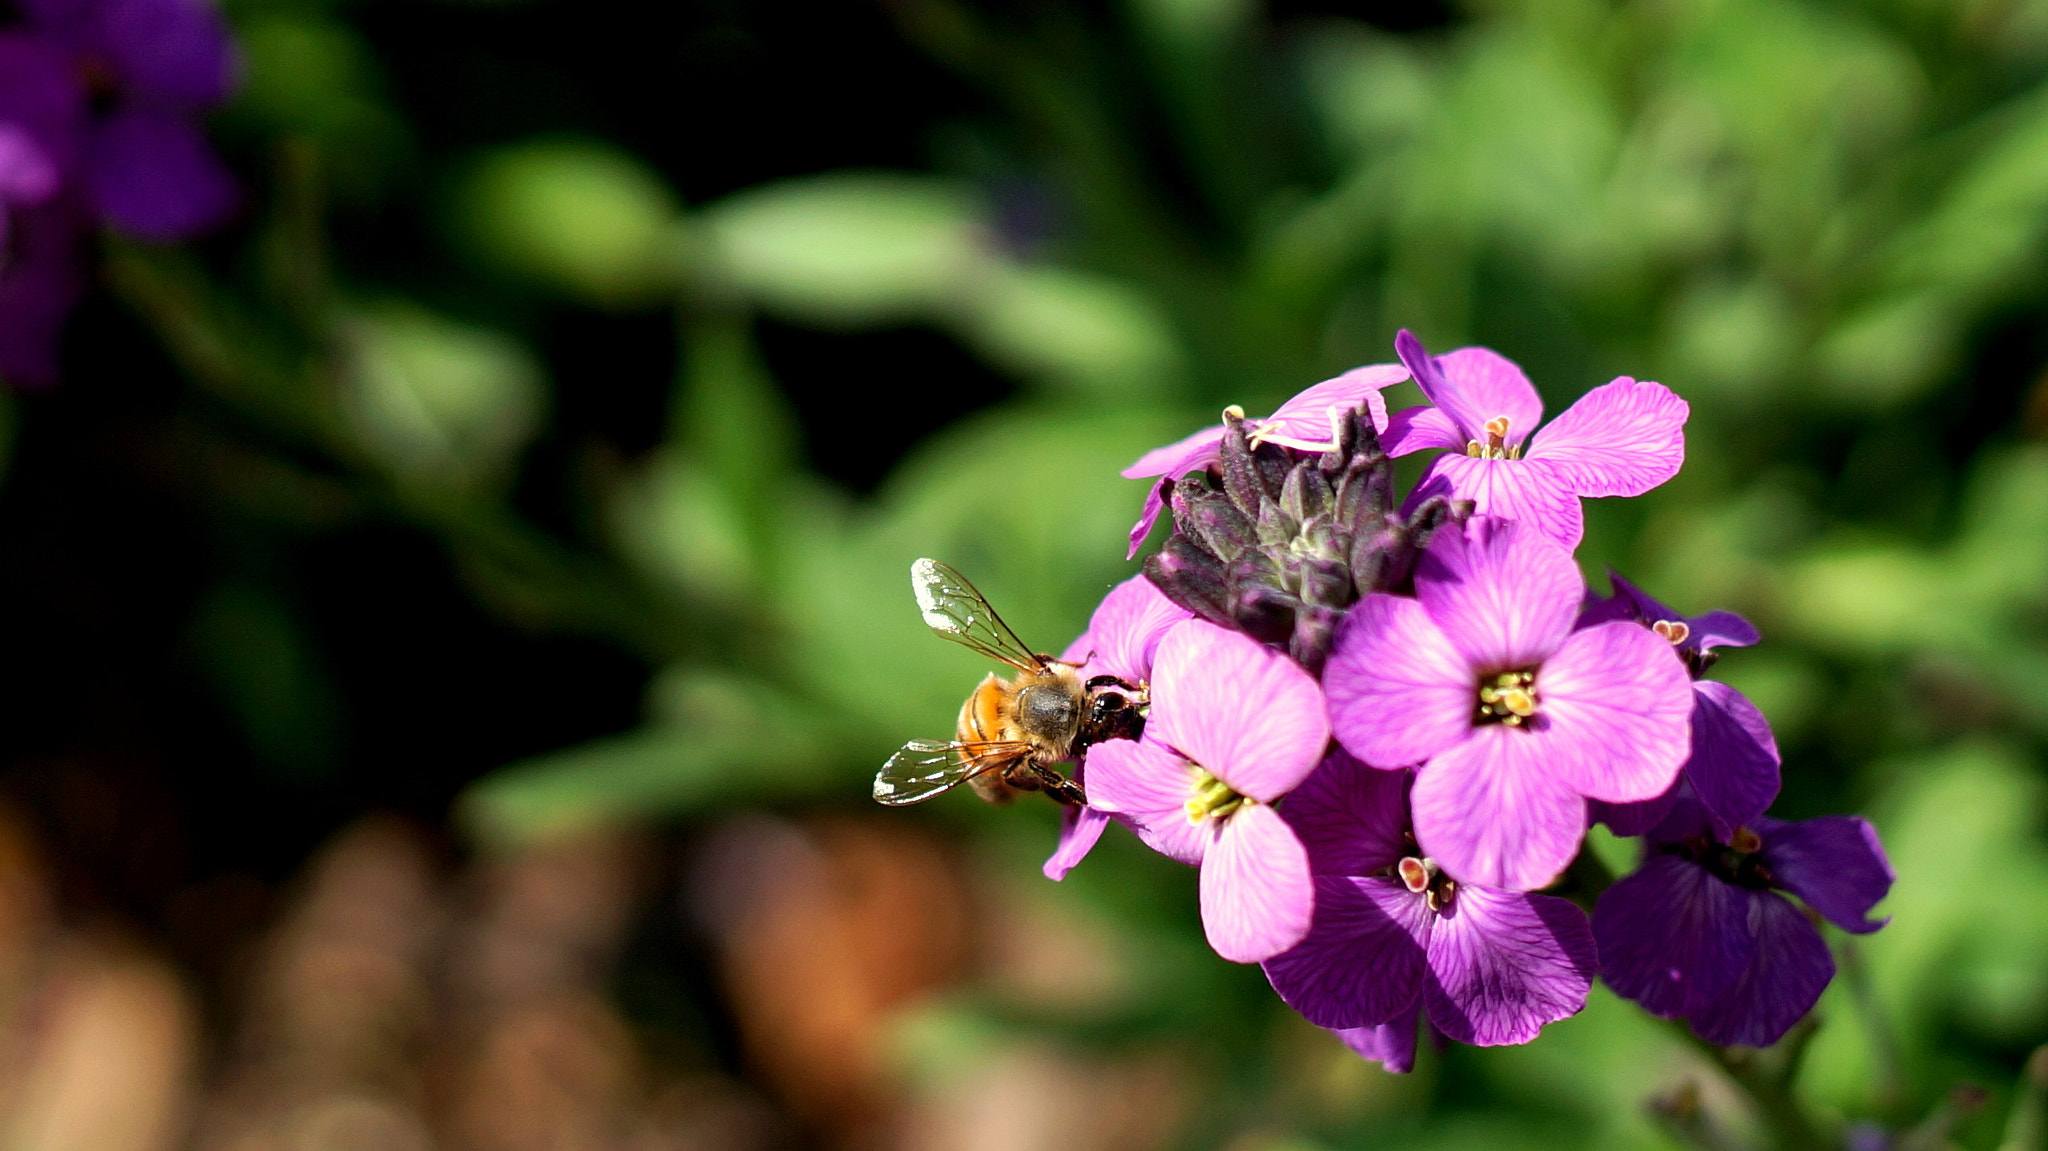 ZEISS Touit 32mm F1.8 sample photo. Bee on a dame's rocket photography